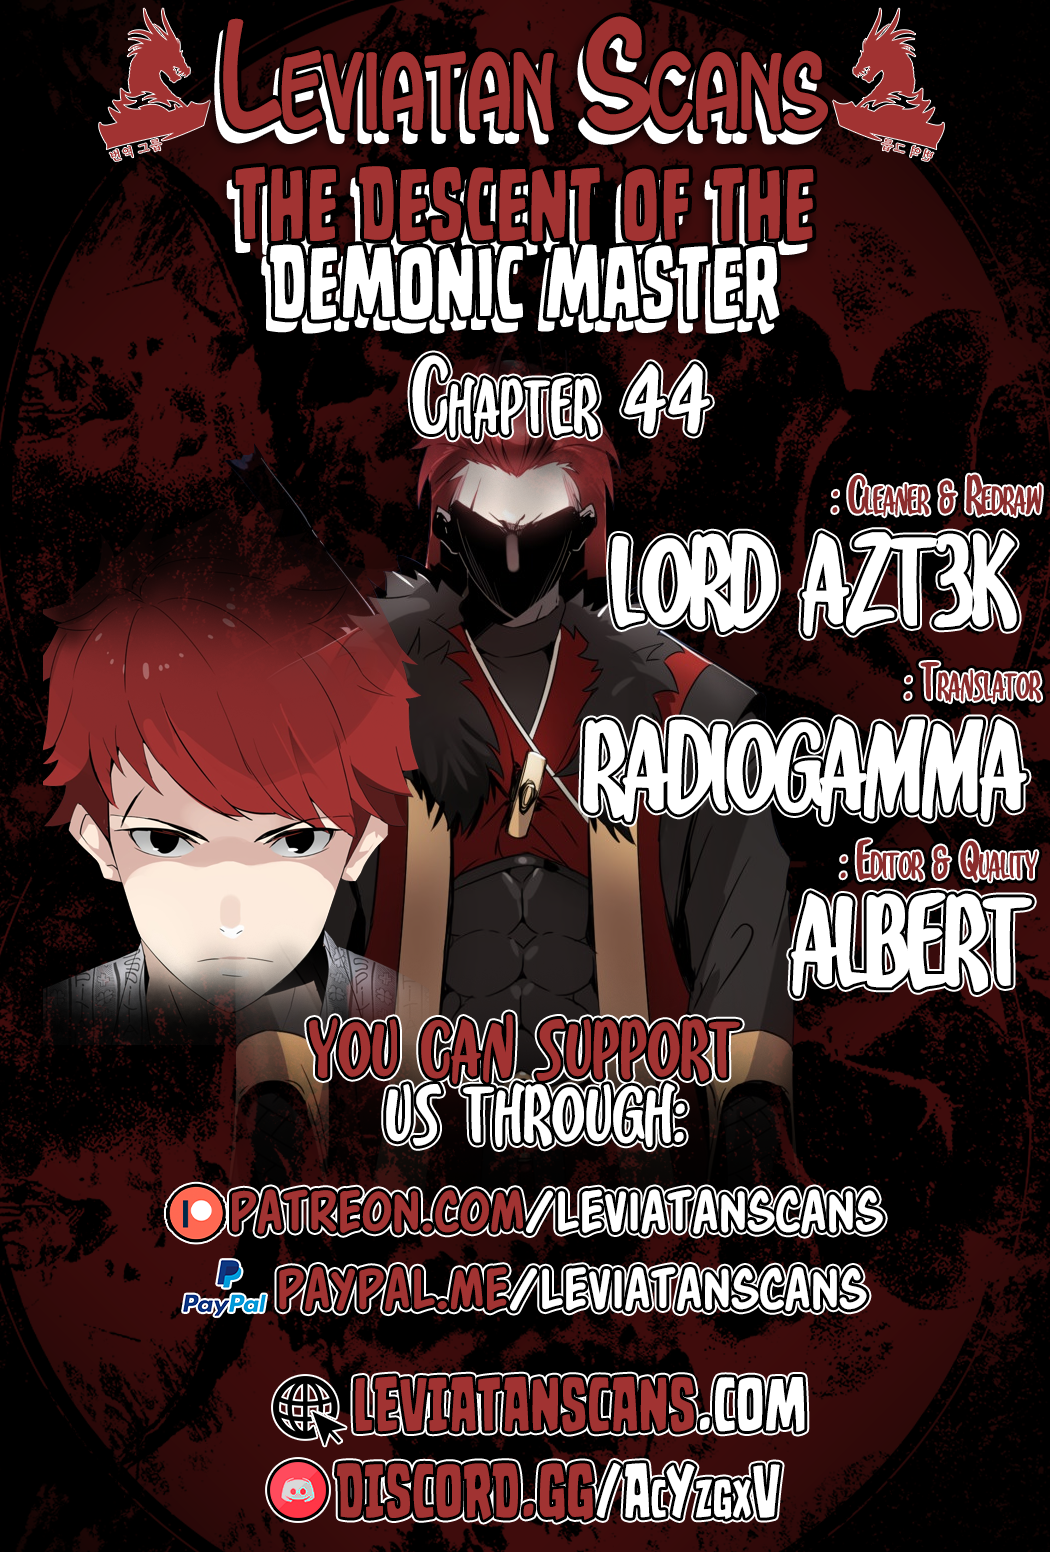 The Descent of the Demonic Master - Chapter 305 - Image 1